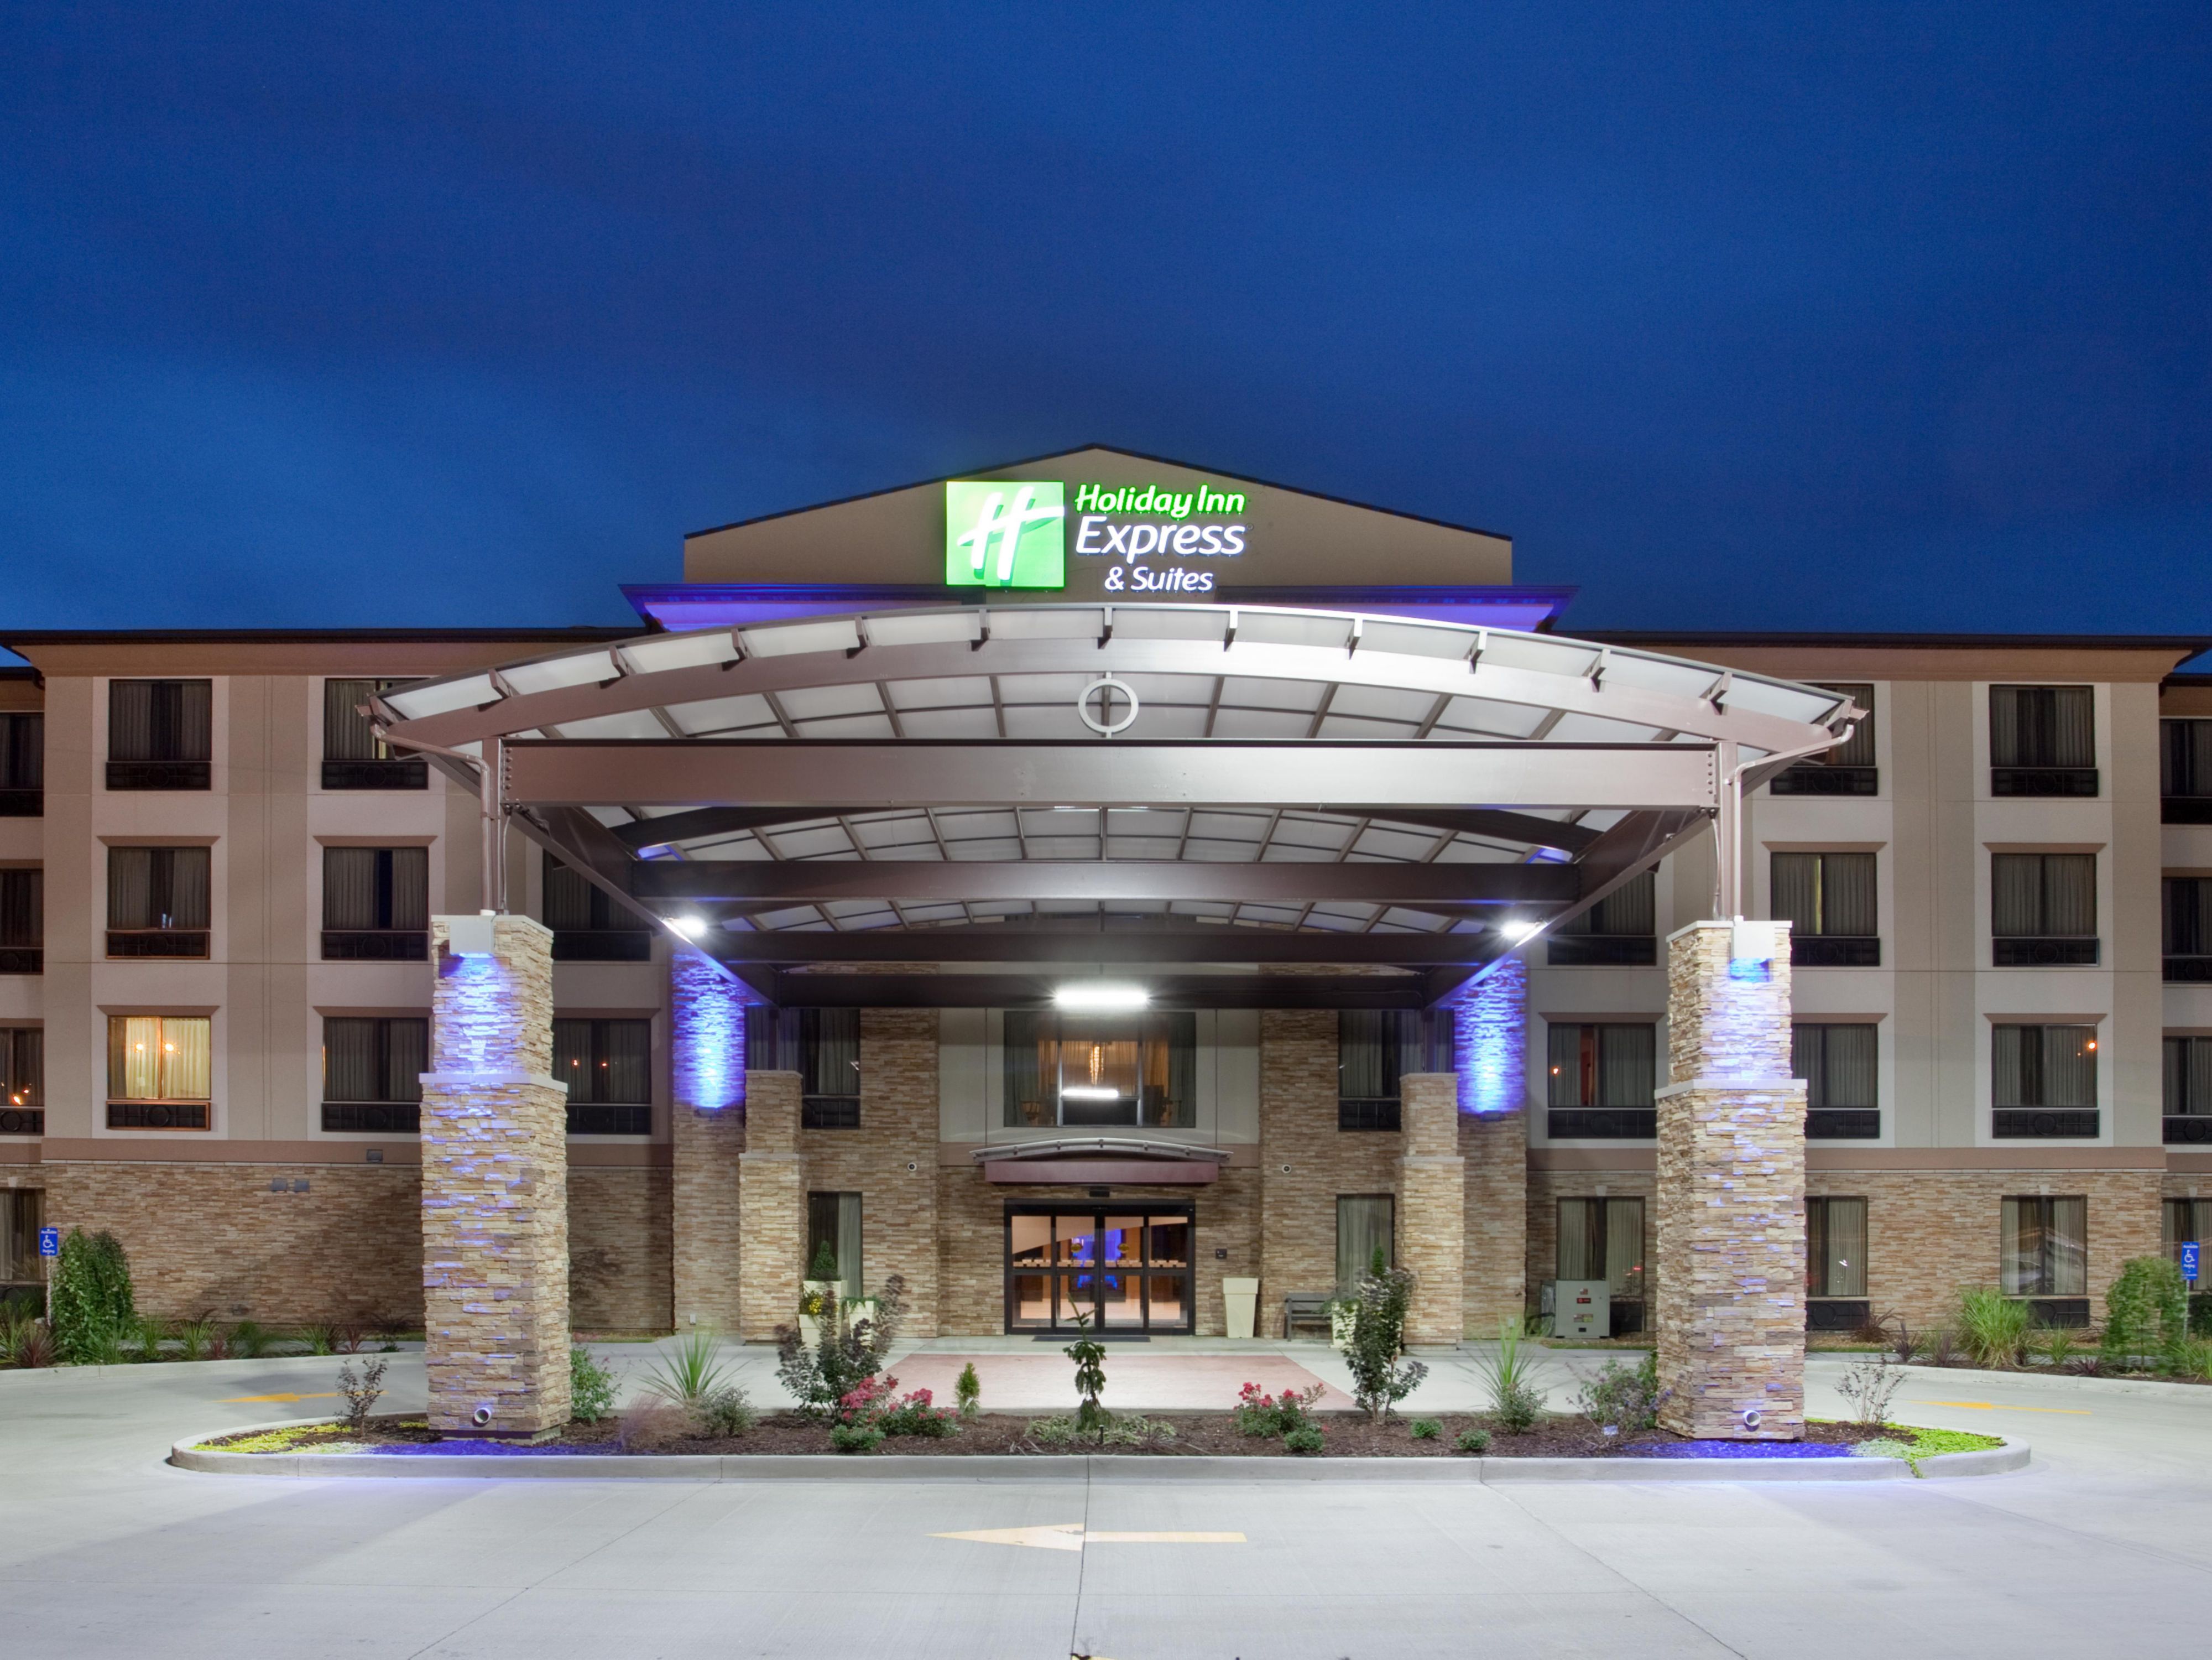 Hotels near St. Louis Airport with Pool | Holiday Inn Express & Suites